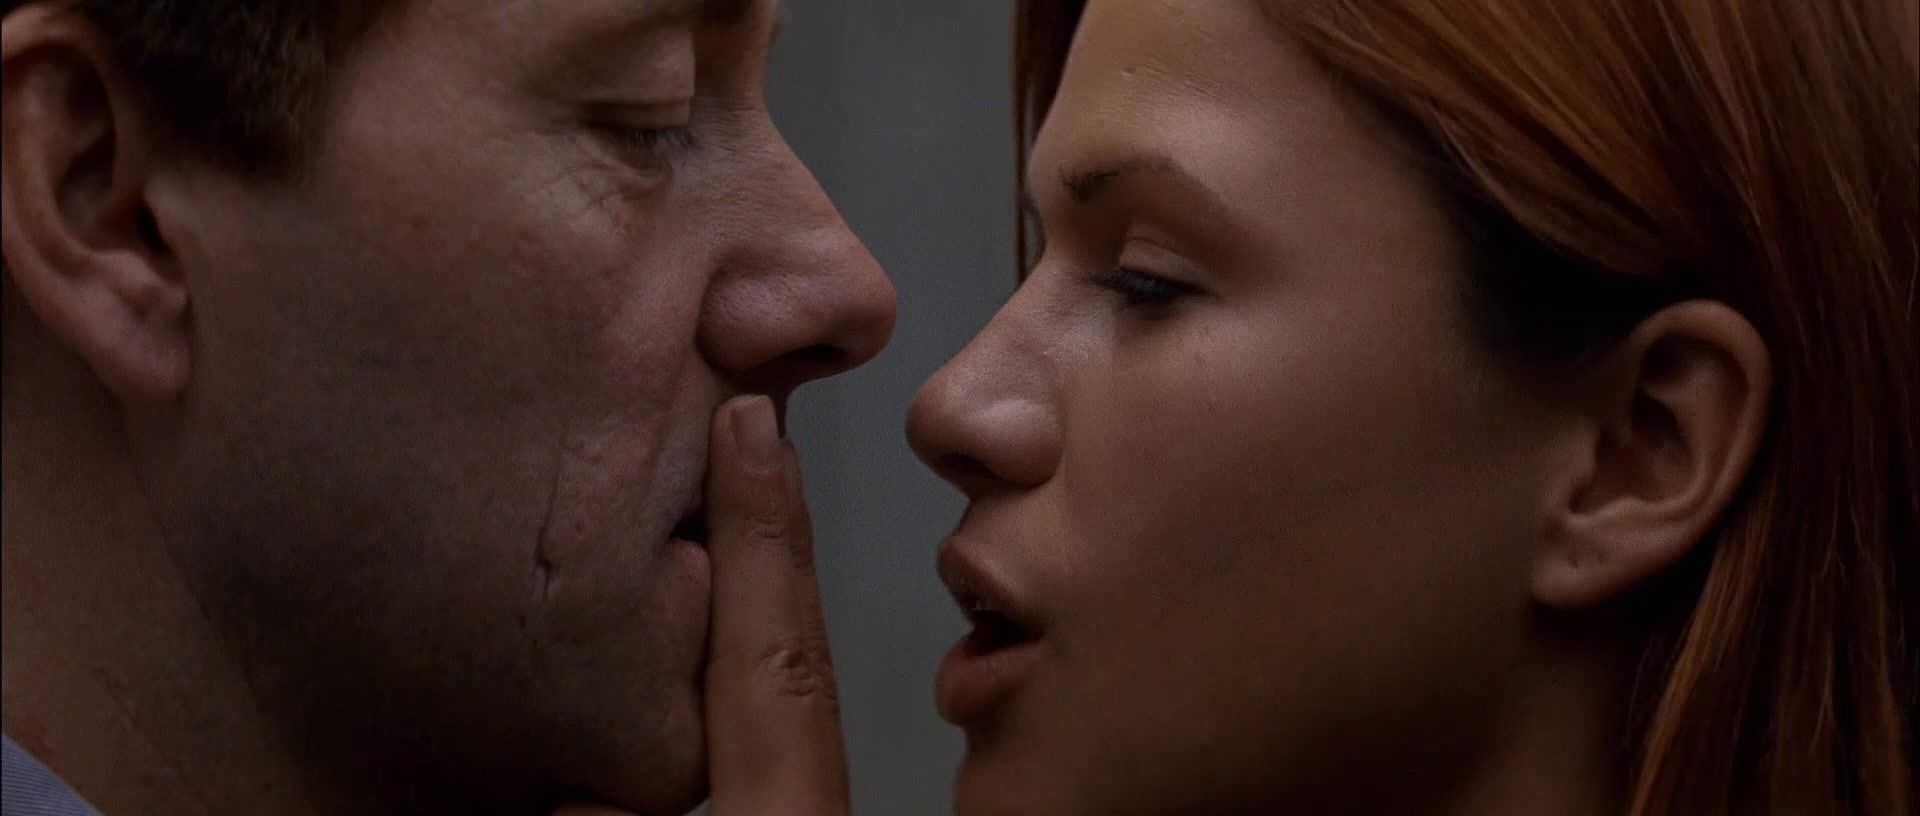 TheOmegaProject Rhona Mitra, Laura Linney nude - The Life of David Gale (2003) Naked Sluts - 1